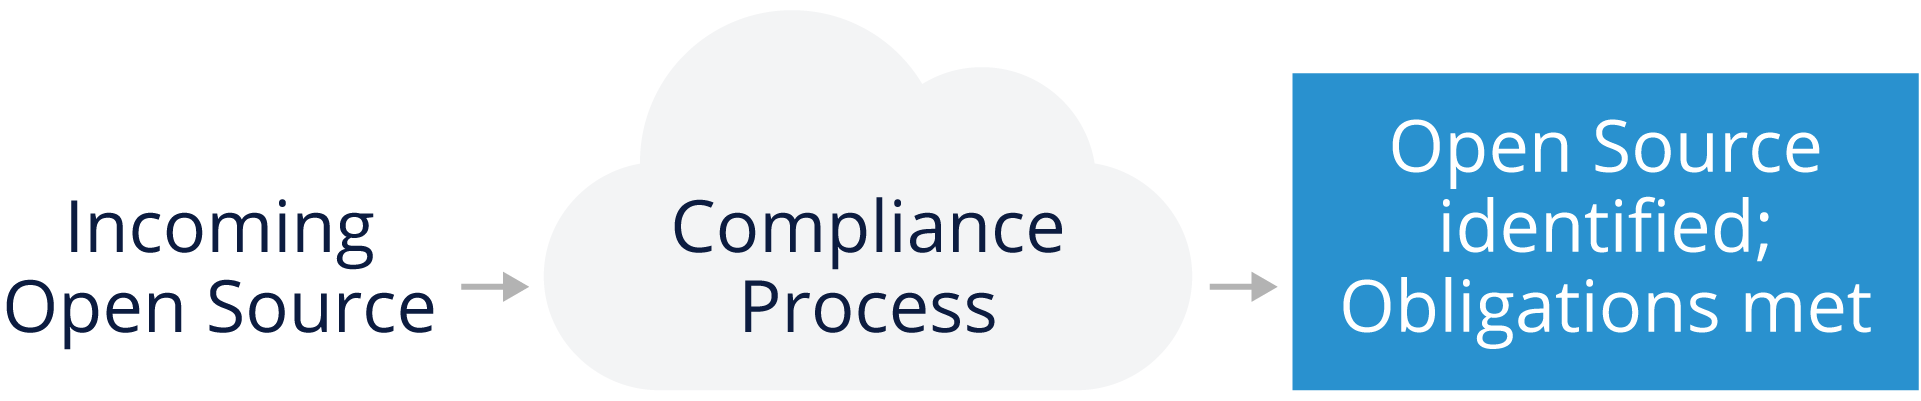 compliance-process.png